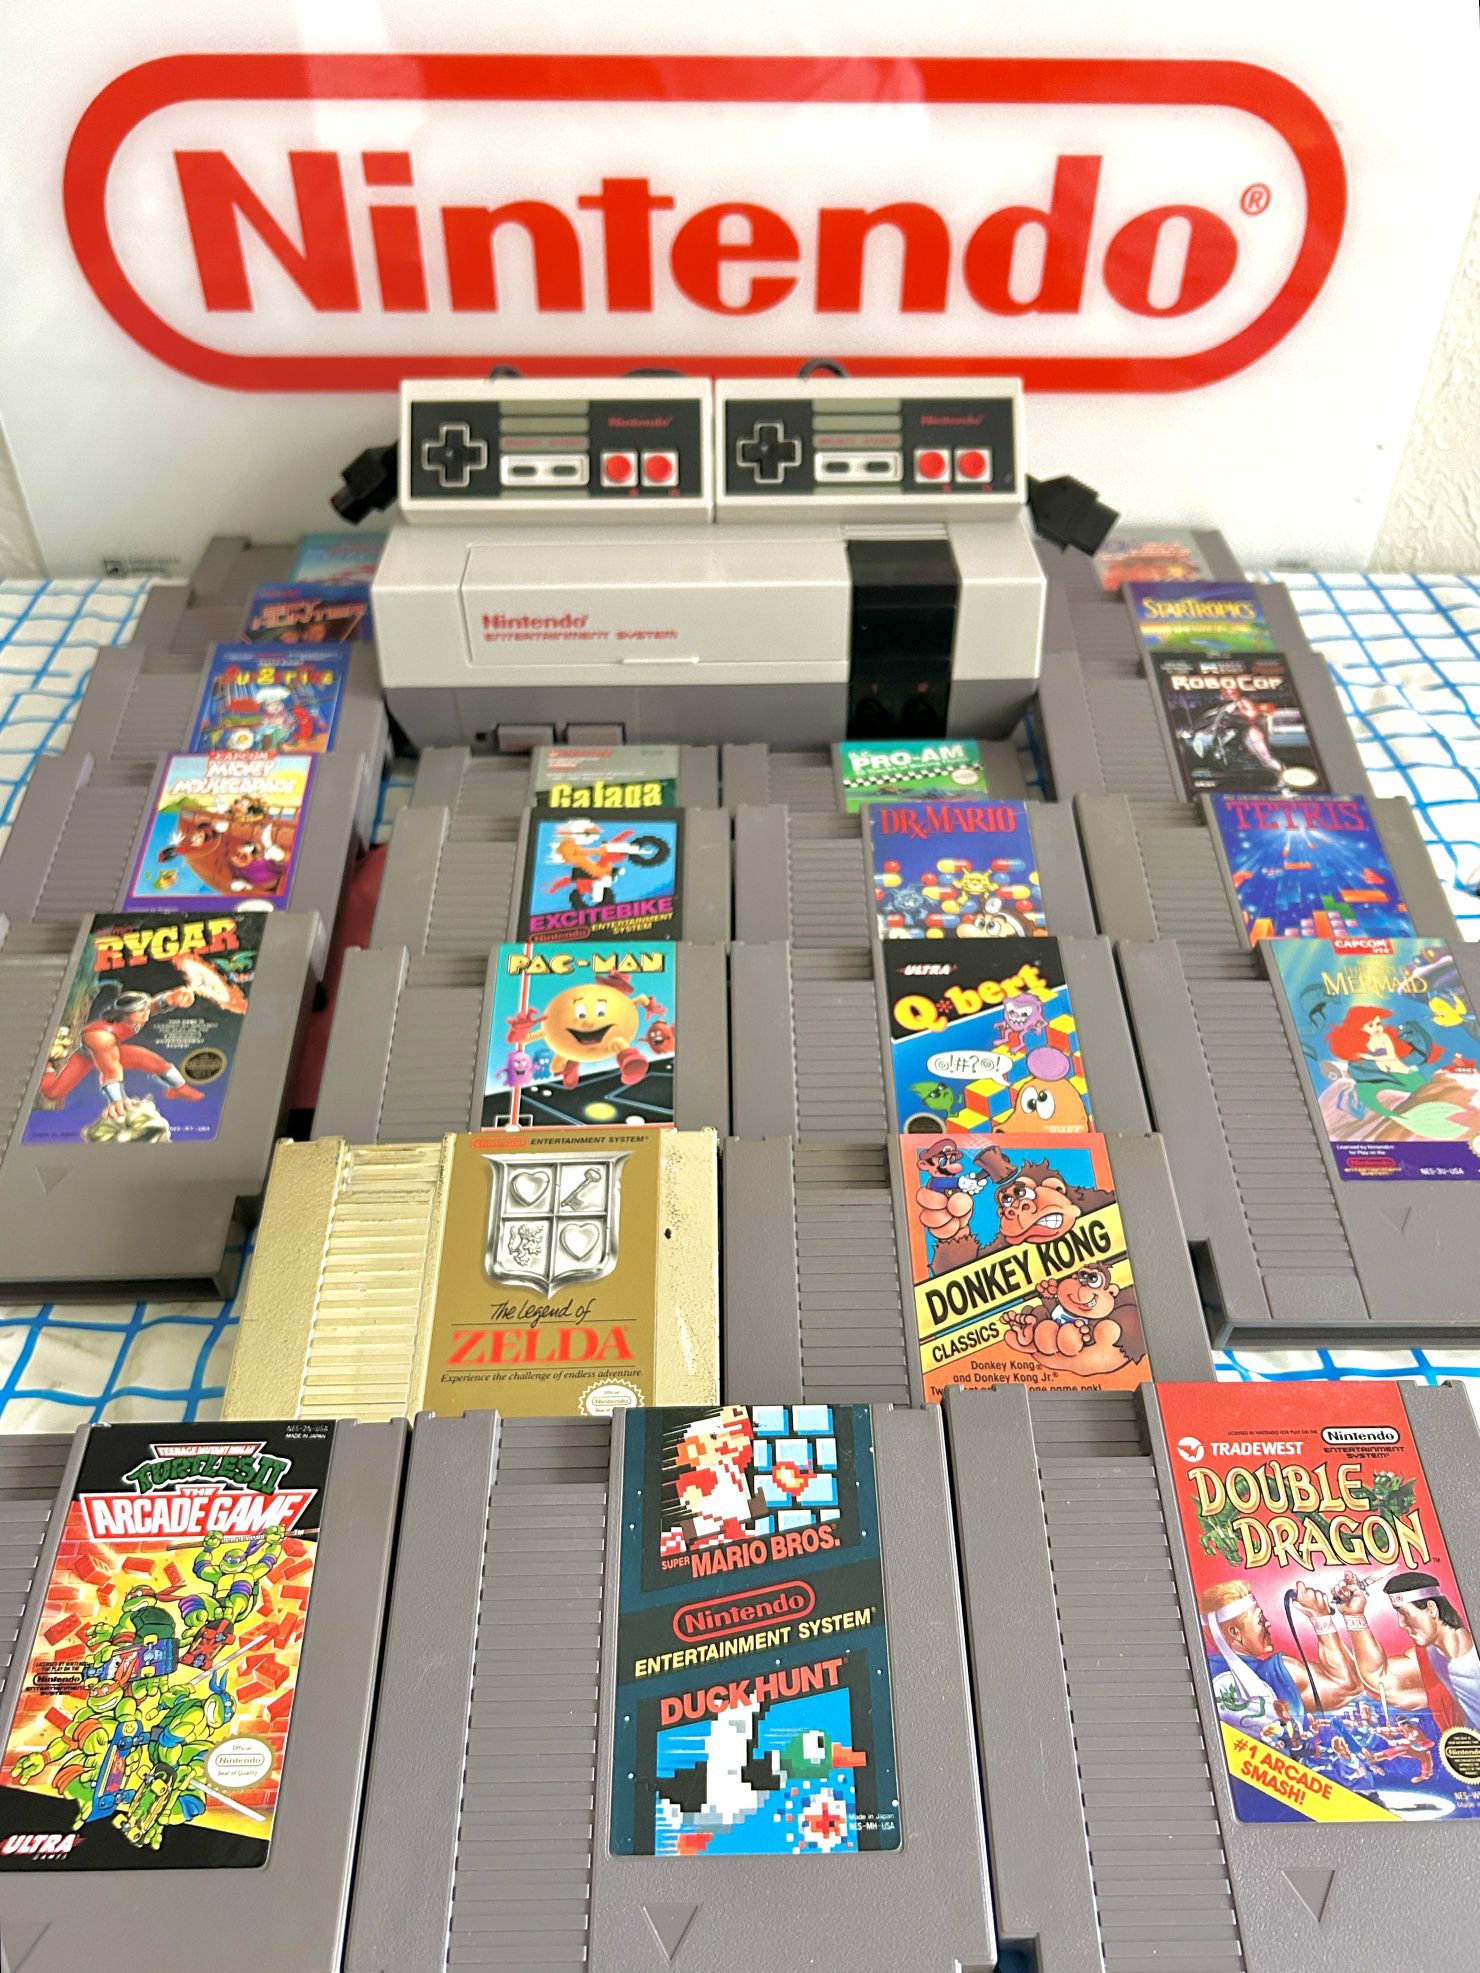 Nintendo NES SYSTEMS & Games  (Best Selection & QUALITY in The Basin)